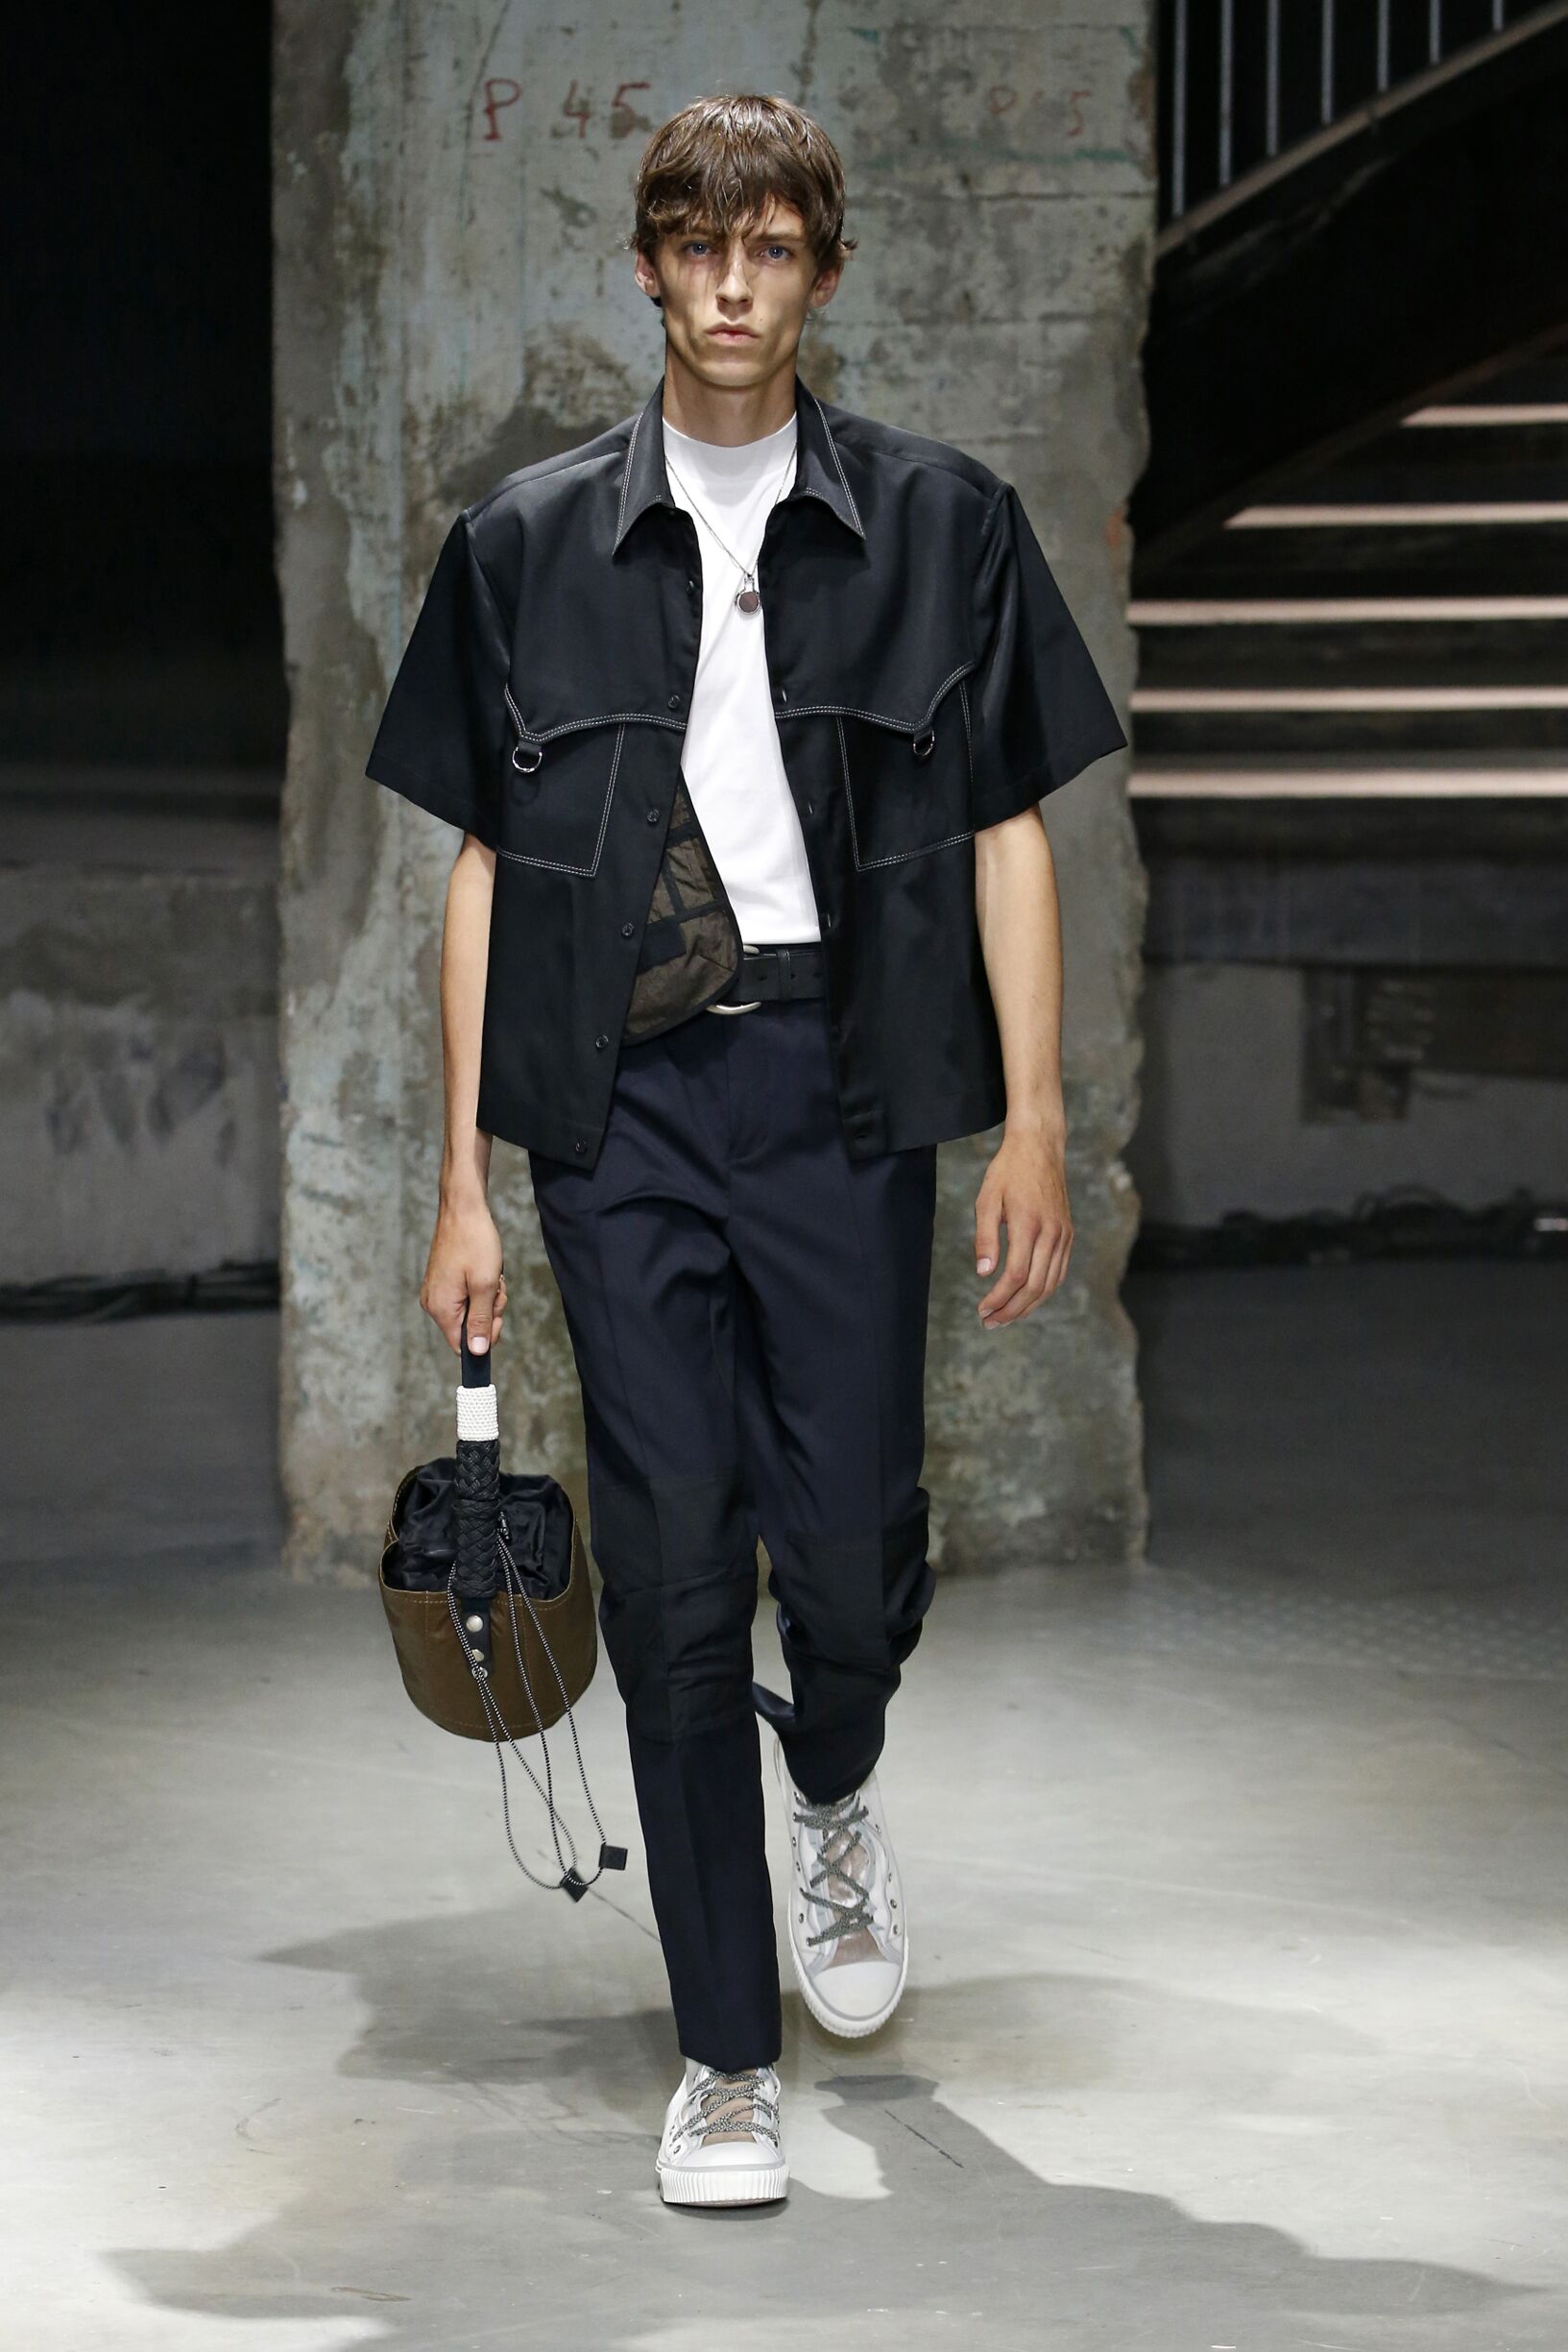 LANVIN SPRING SUMMER 2019 MEN’S COLLECTION | The Skinny Beep